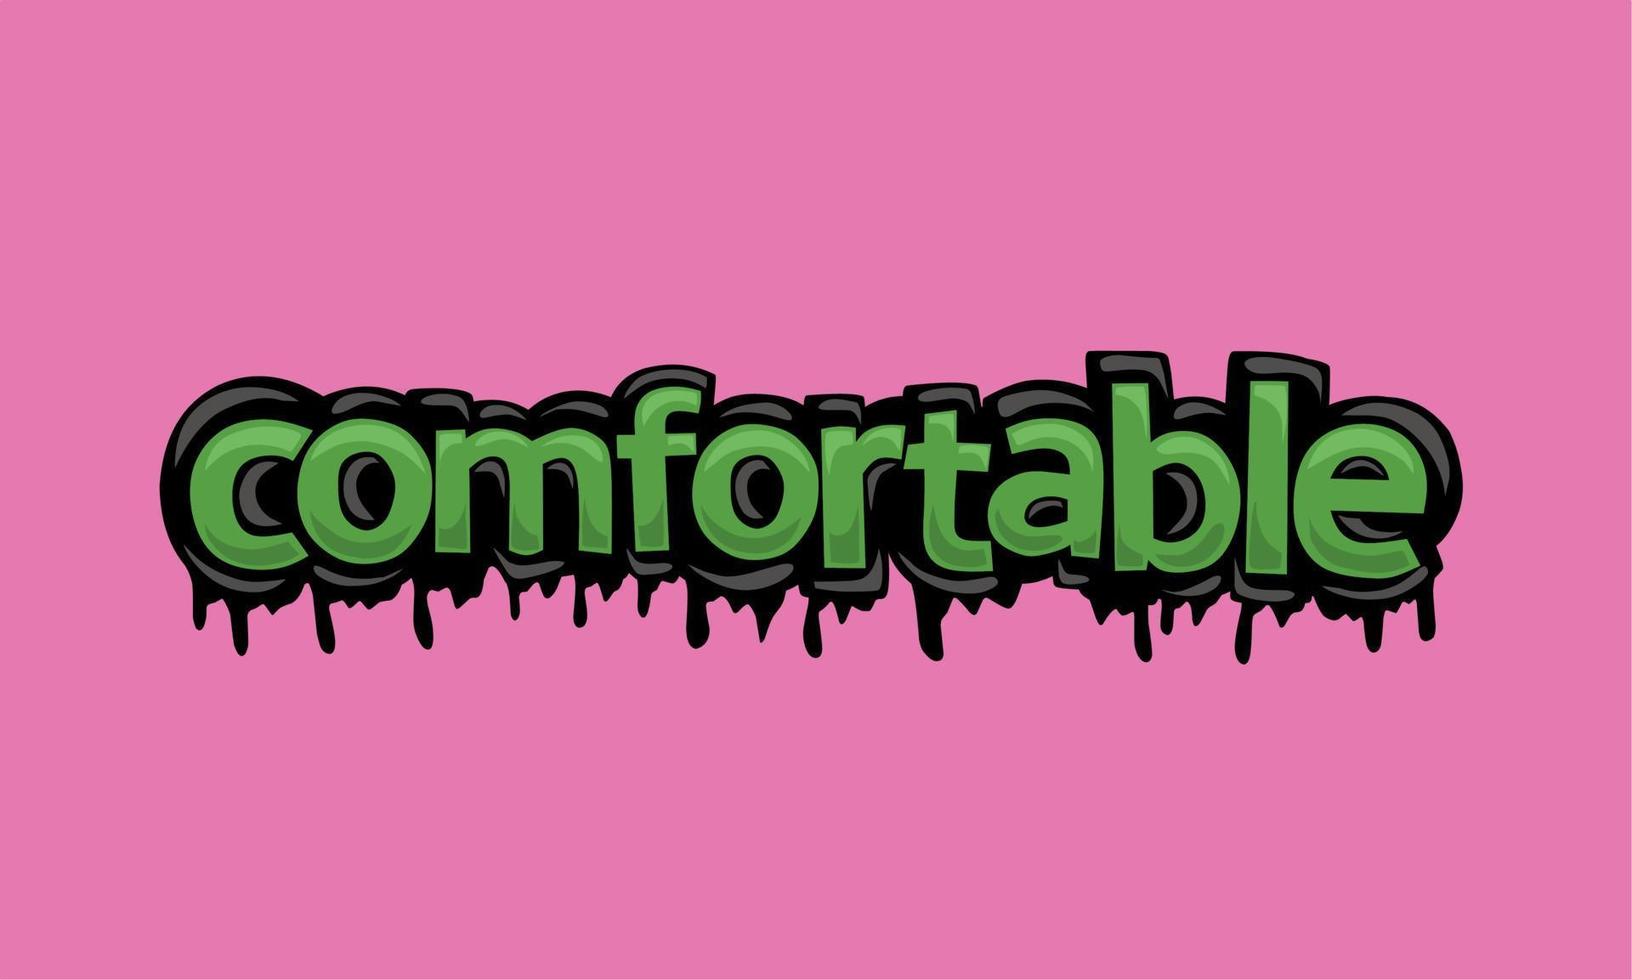 COMFORTABLE writing vector design on pink background